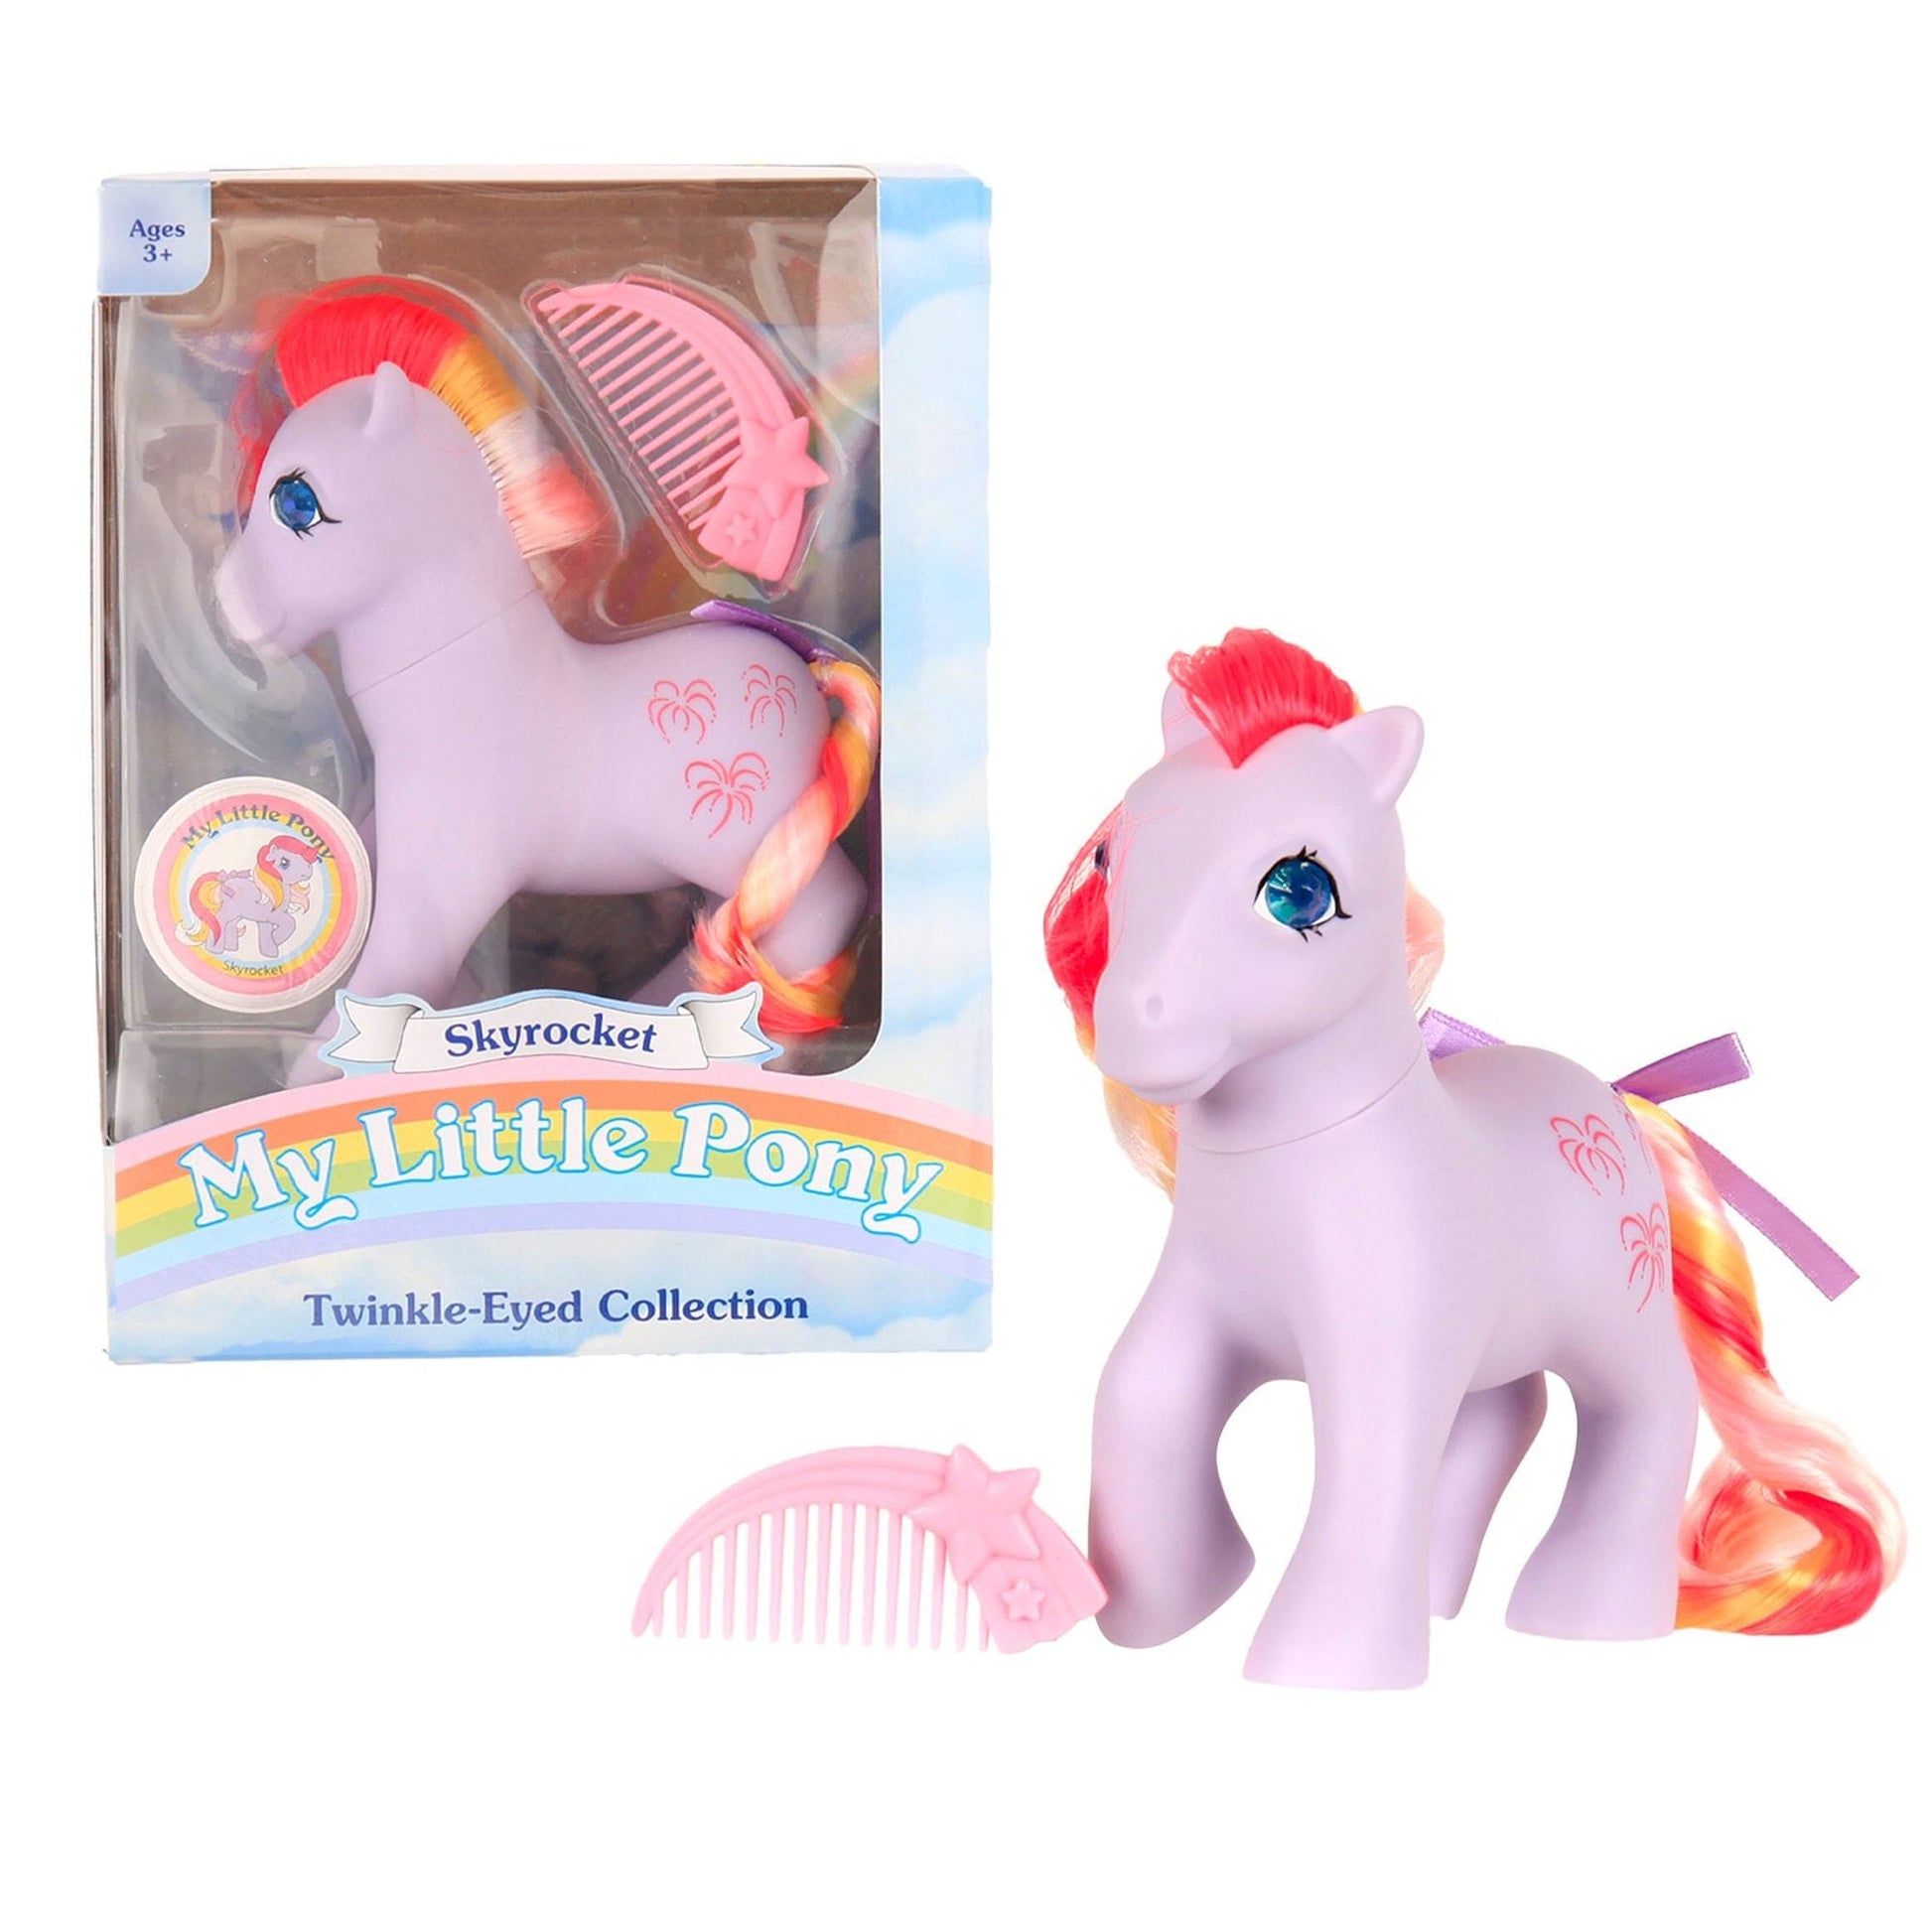 My Little Pony My Little Pony 35th Anniversary My Little Pony Twinkle Eyed Collection Skyrocket (7561344352504)